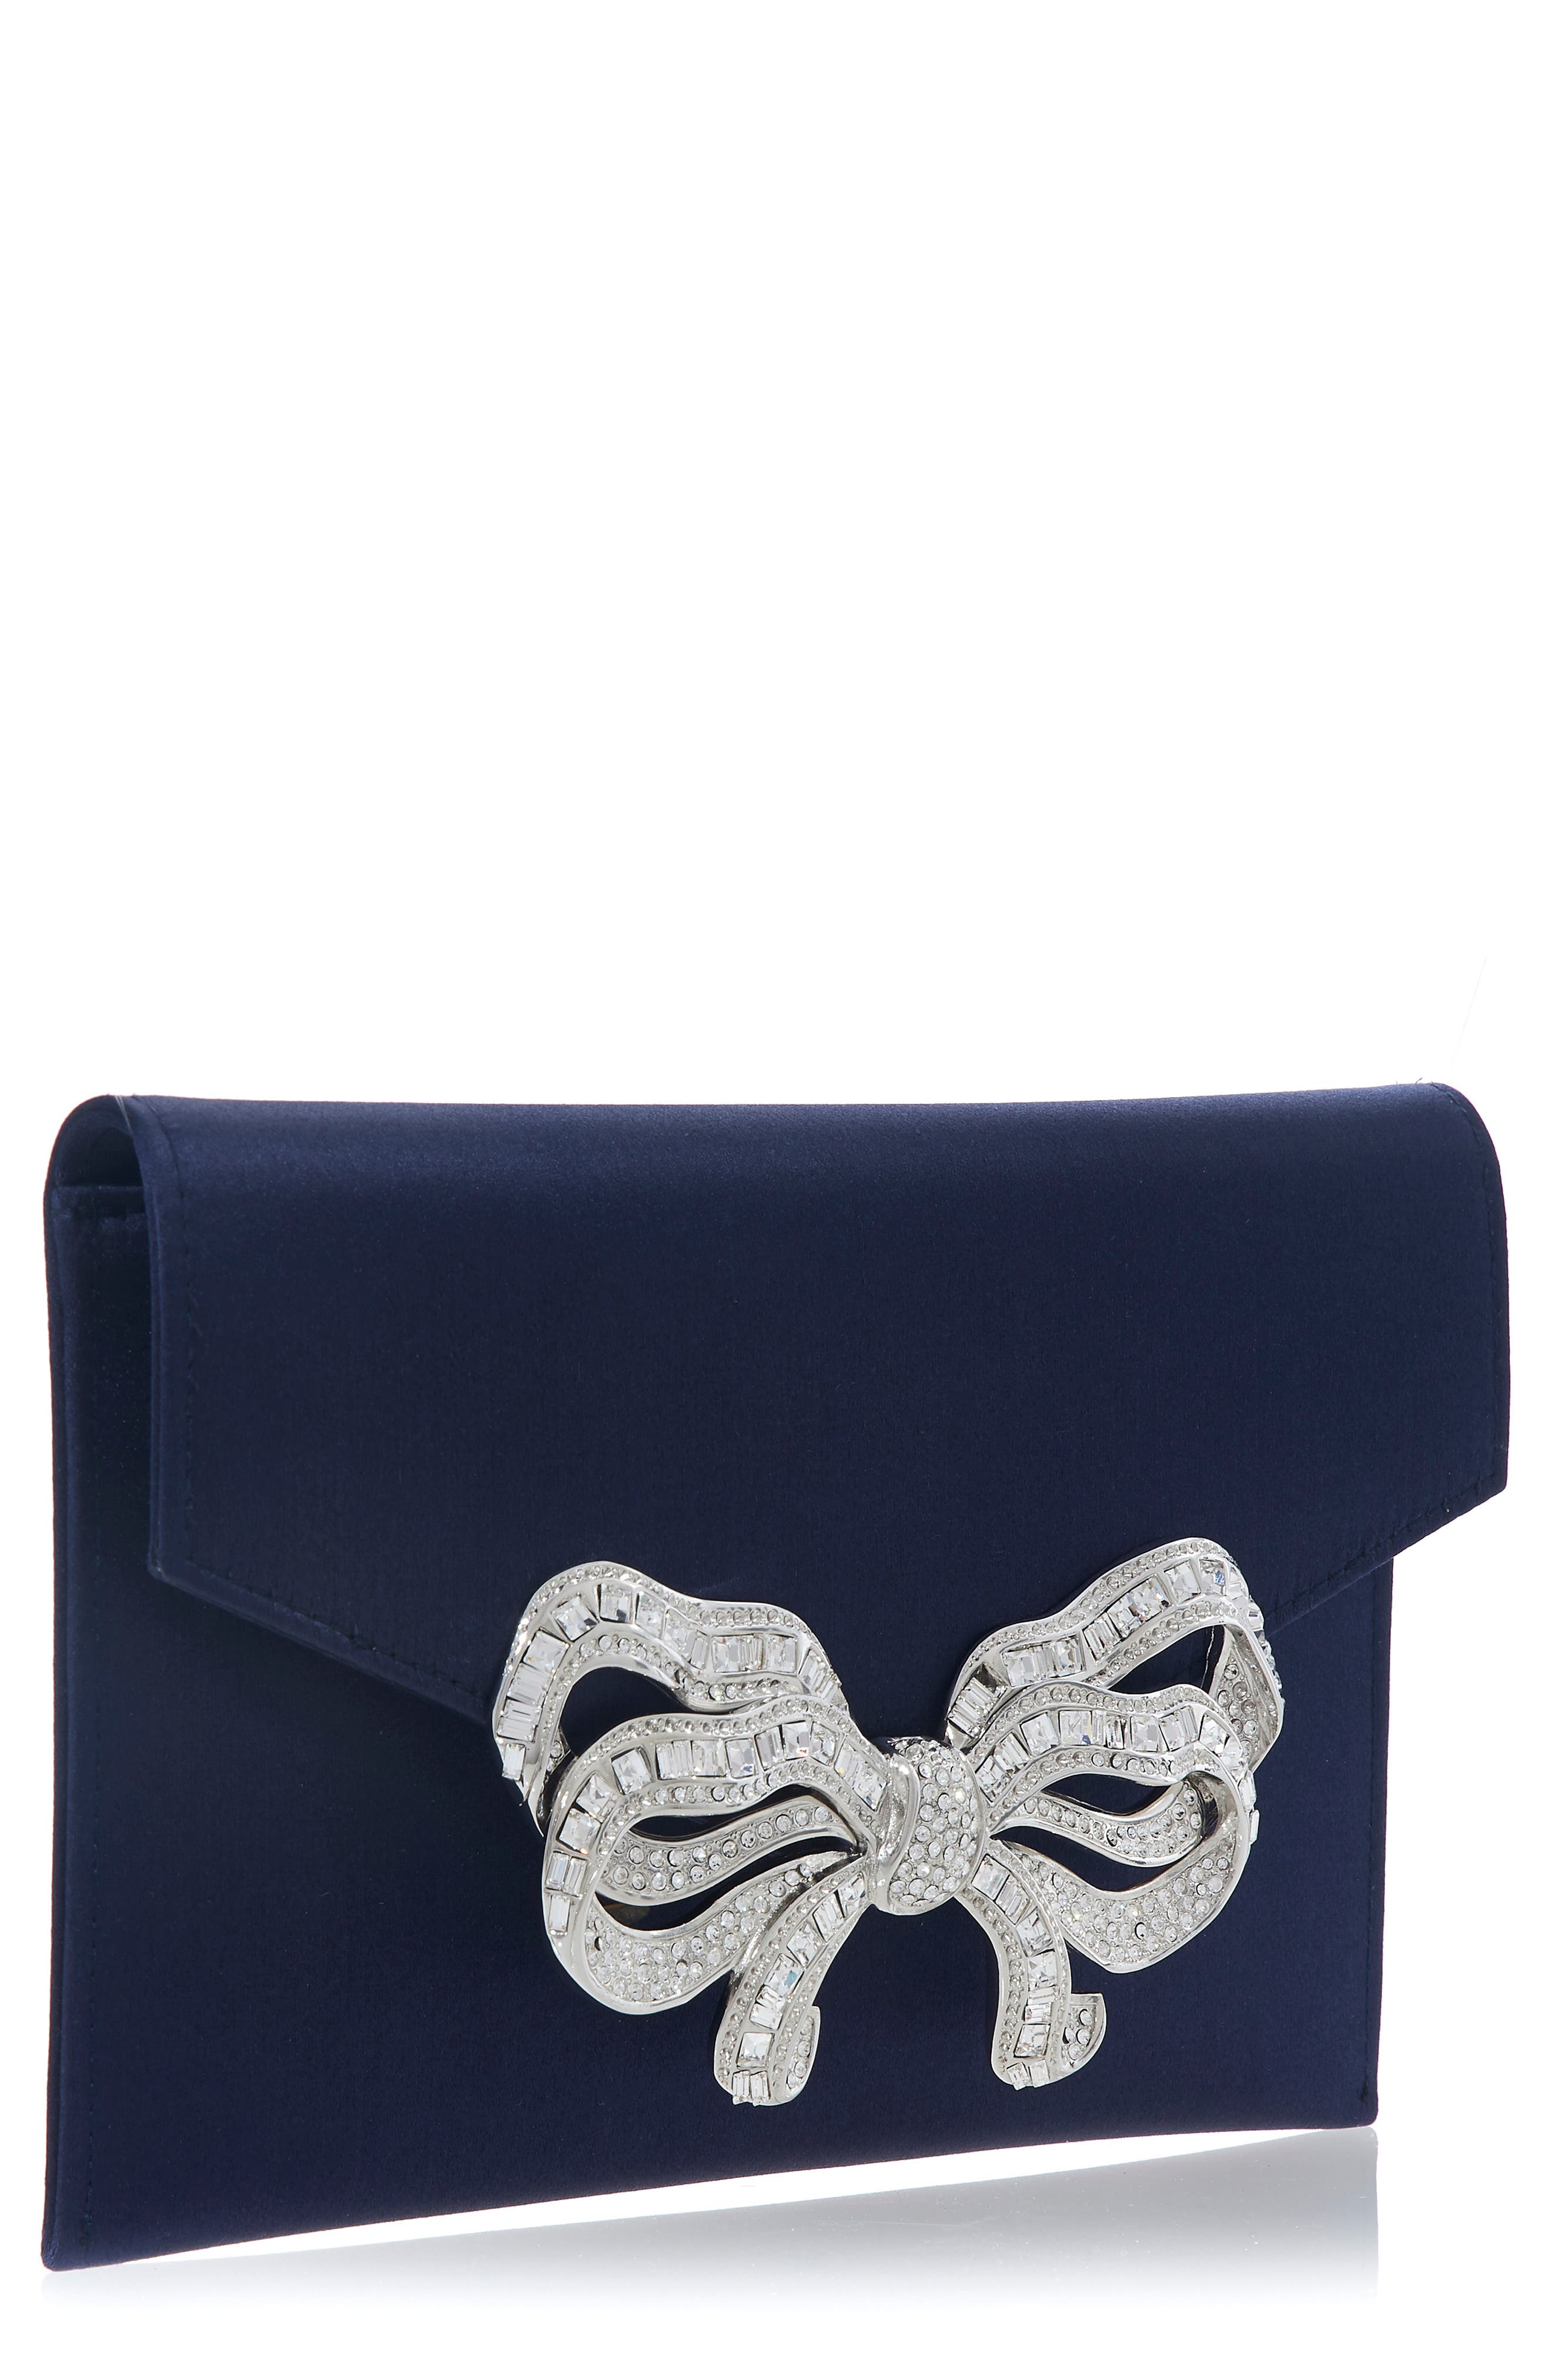 Judith Leiber Couture Crystal Bow Satin Envelope Clutch in Silver Navy